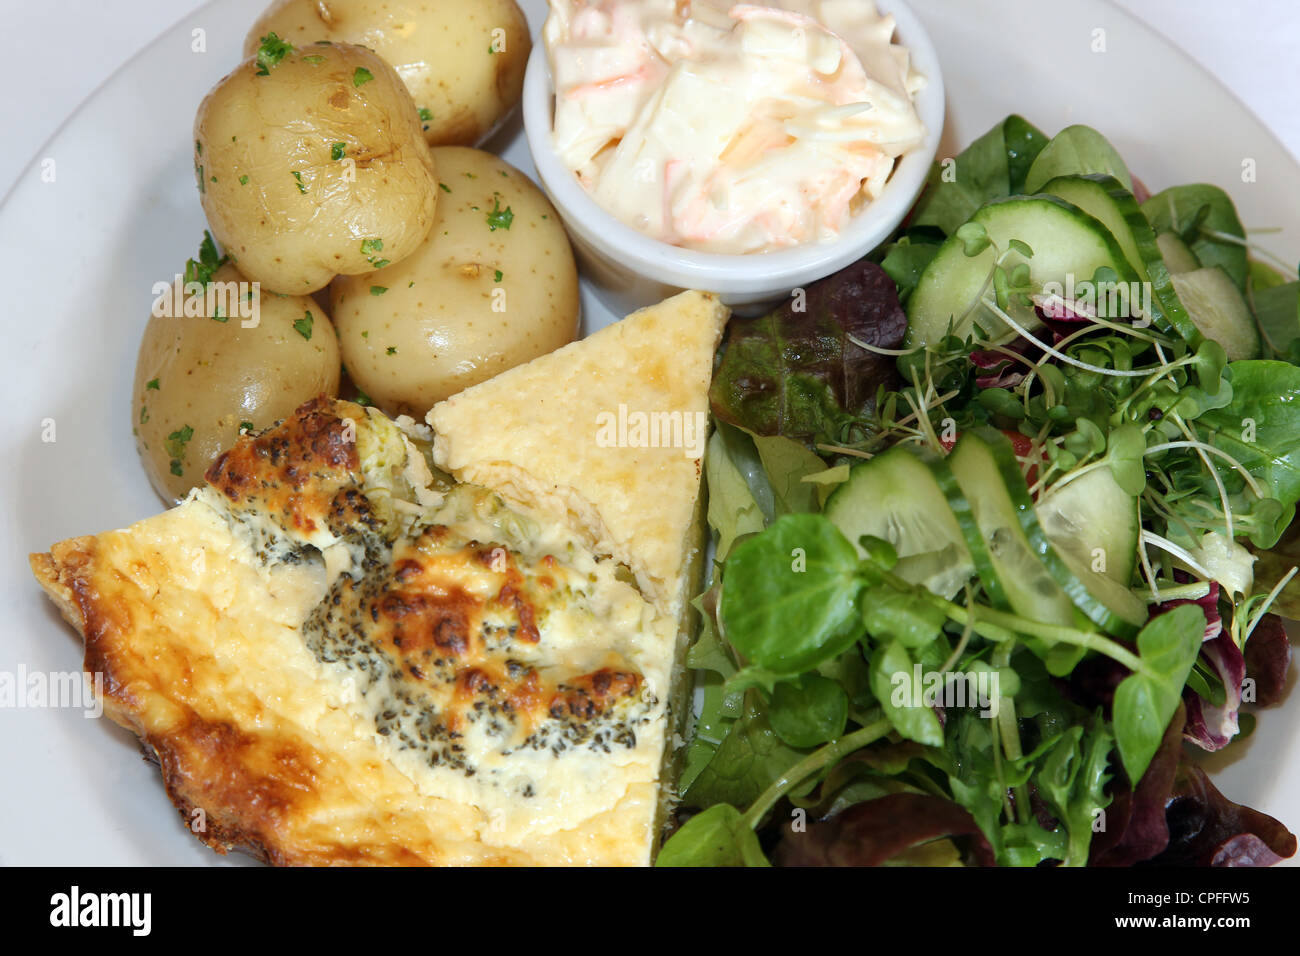 Quiche salad lunch Stock Photo